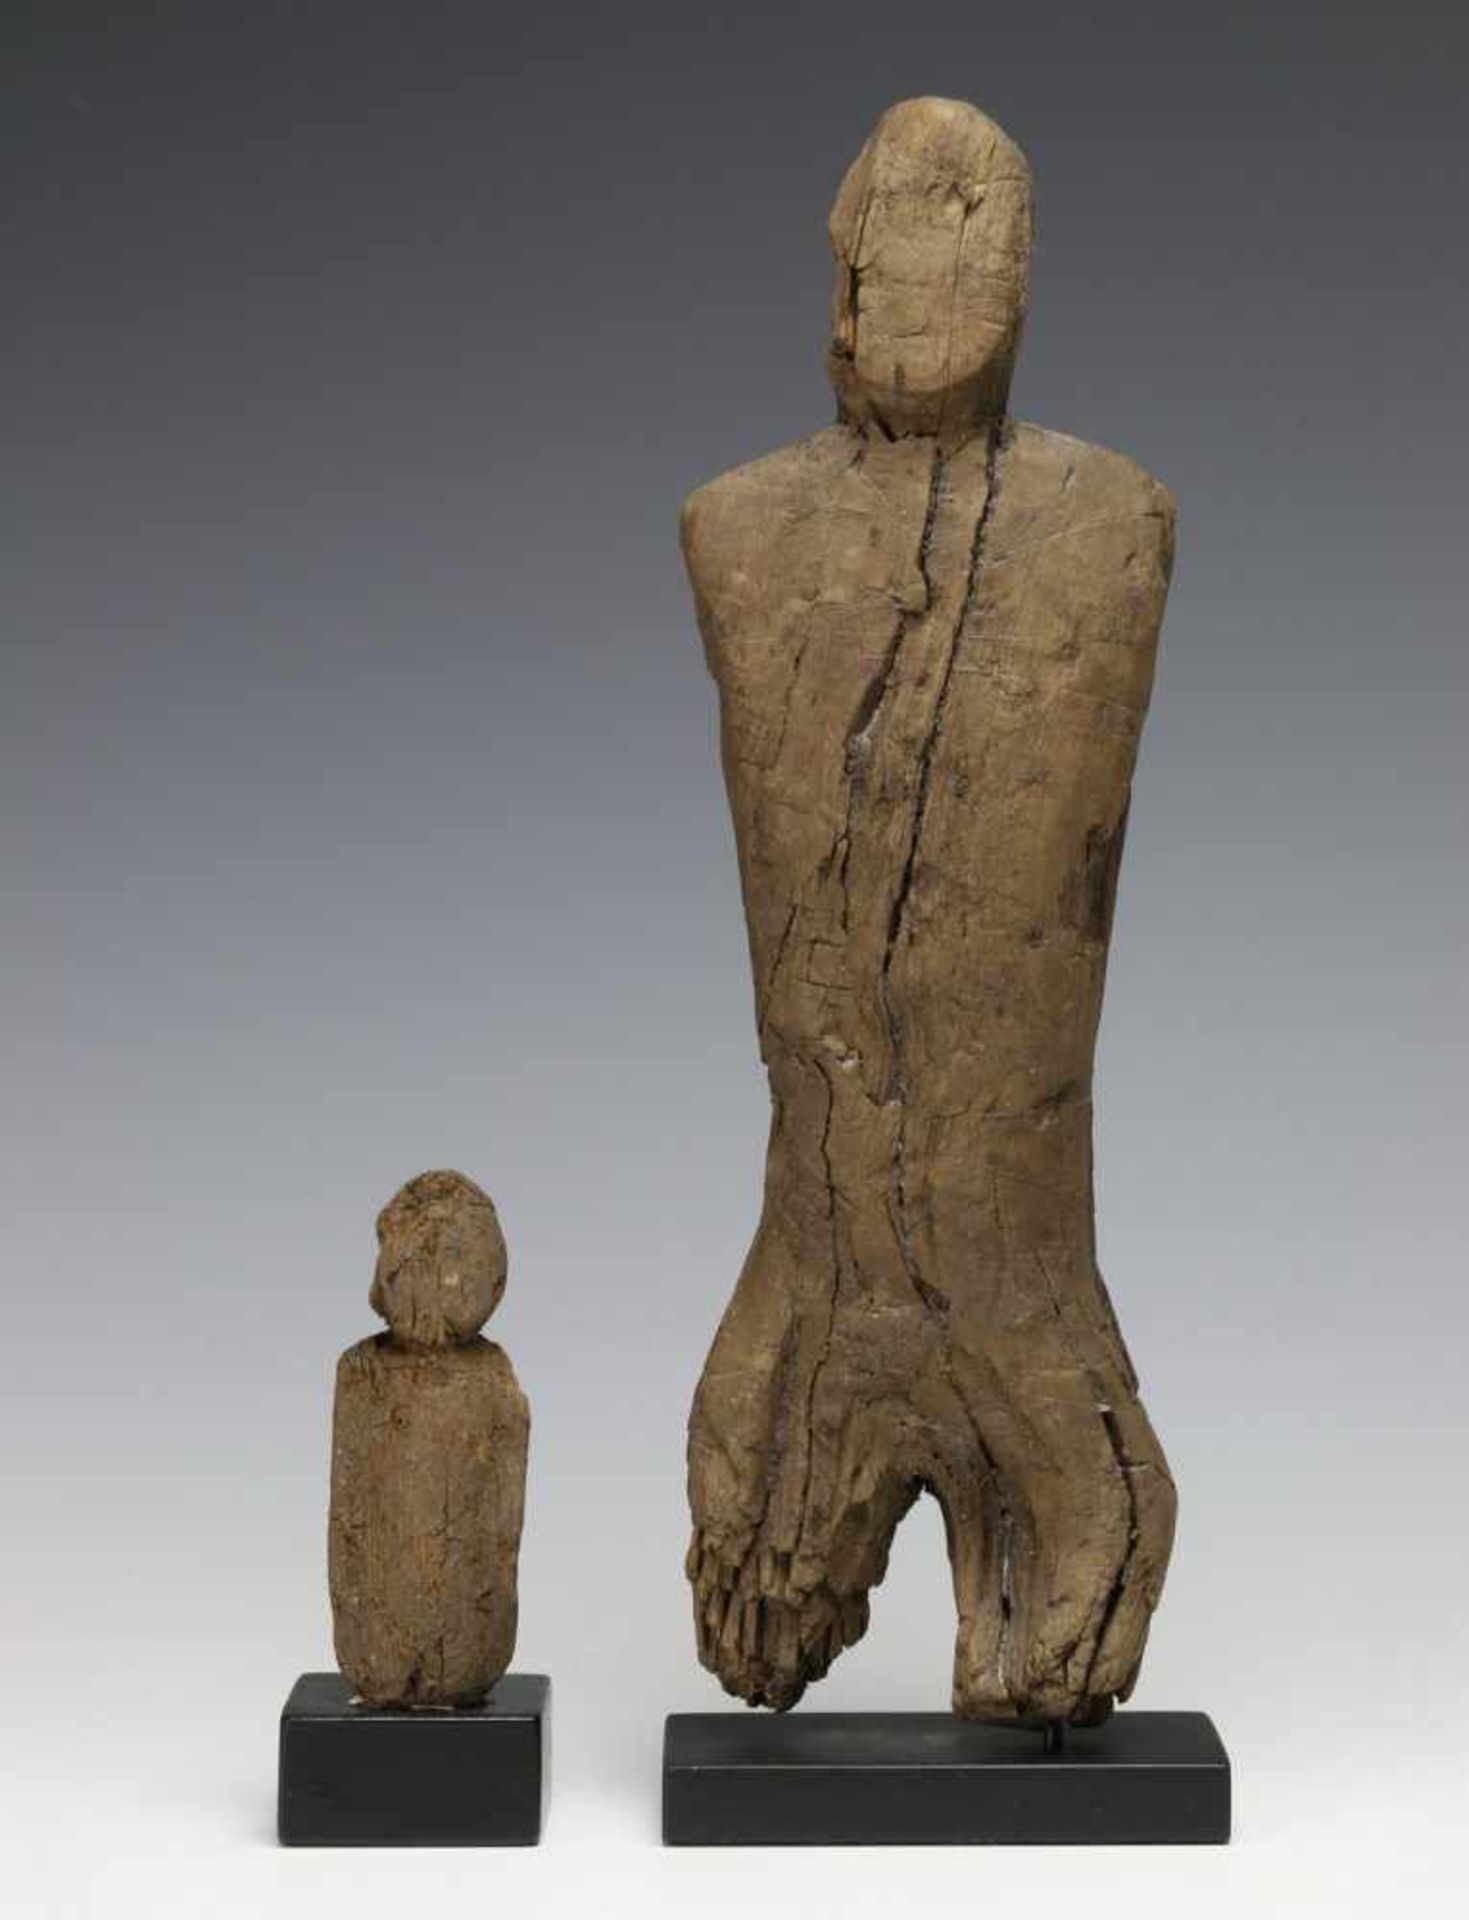 Arctic Circle, Thule Culture, two driftwood anthropomorphic figuresProvenance, auction of Lord - Bild 3 aus 3